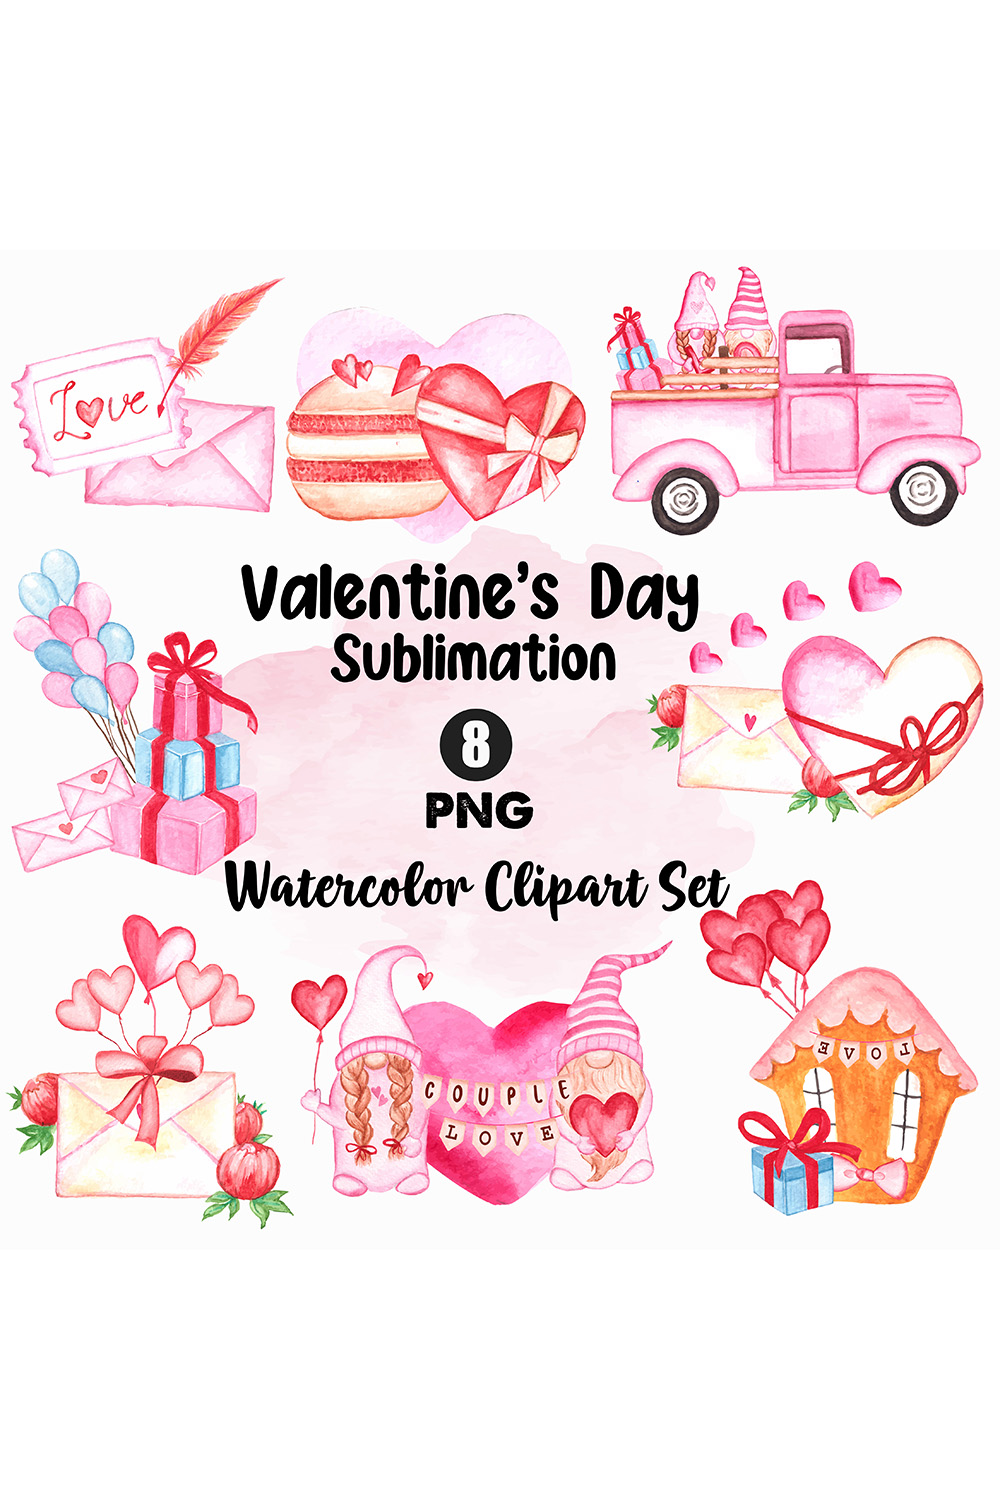 A selection of colorful watercolor images on the theme of Valentines Day